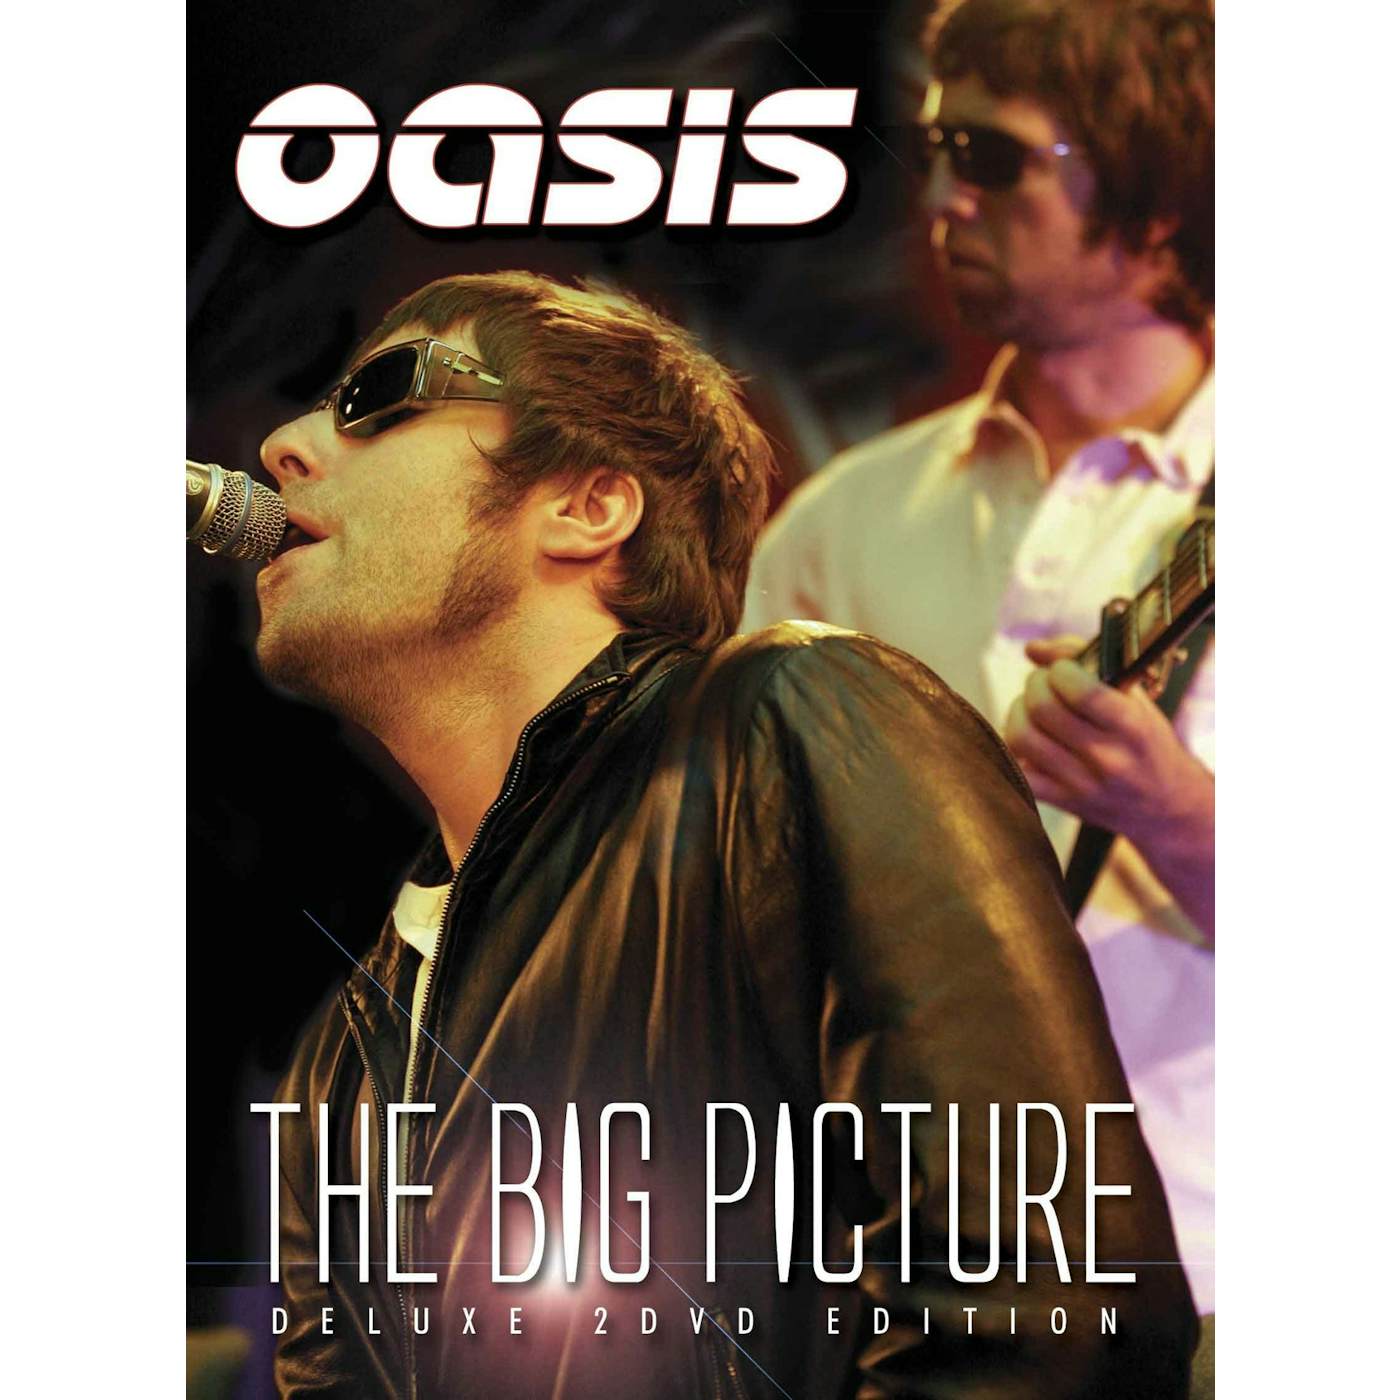 Oasis DVD - The Big Picture